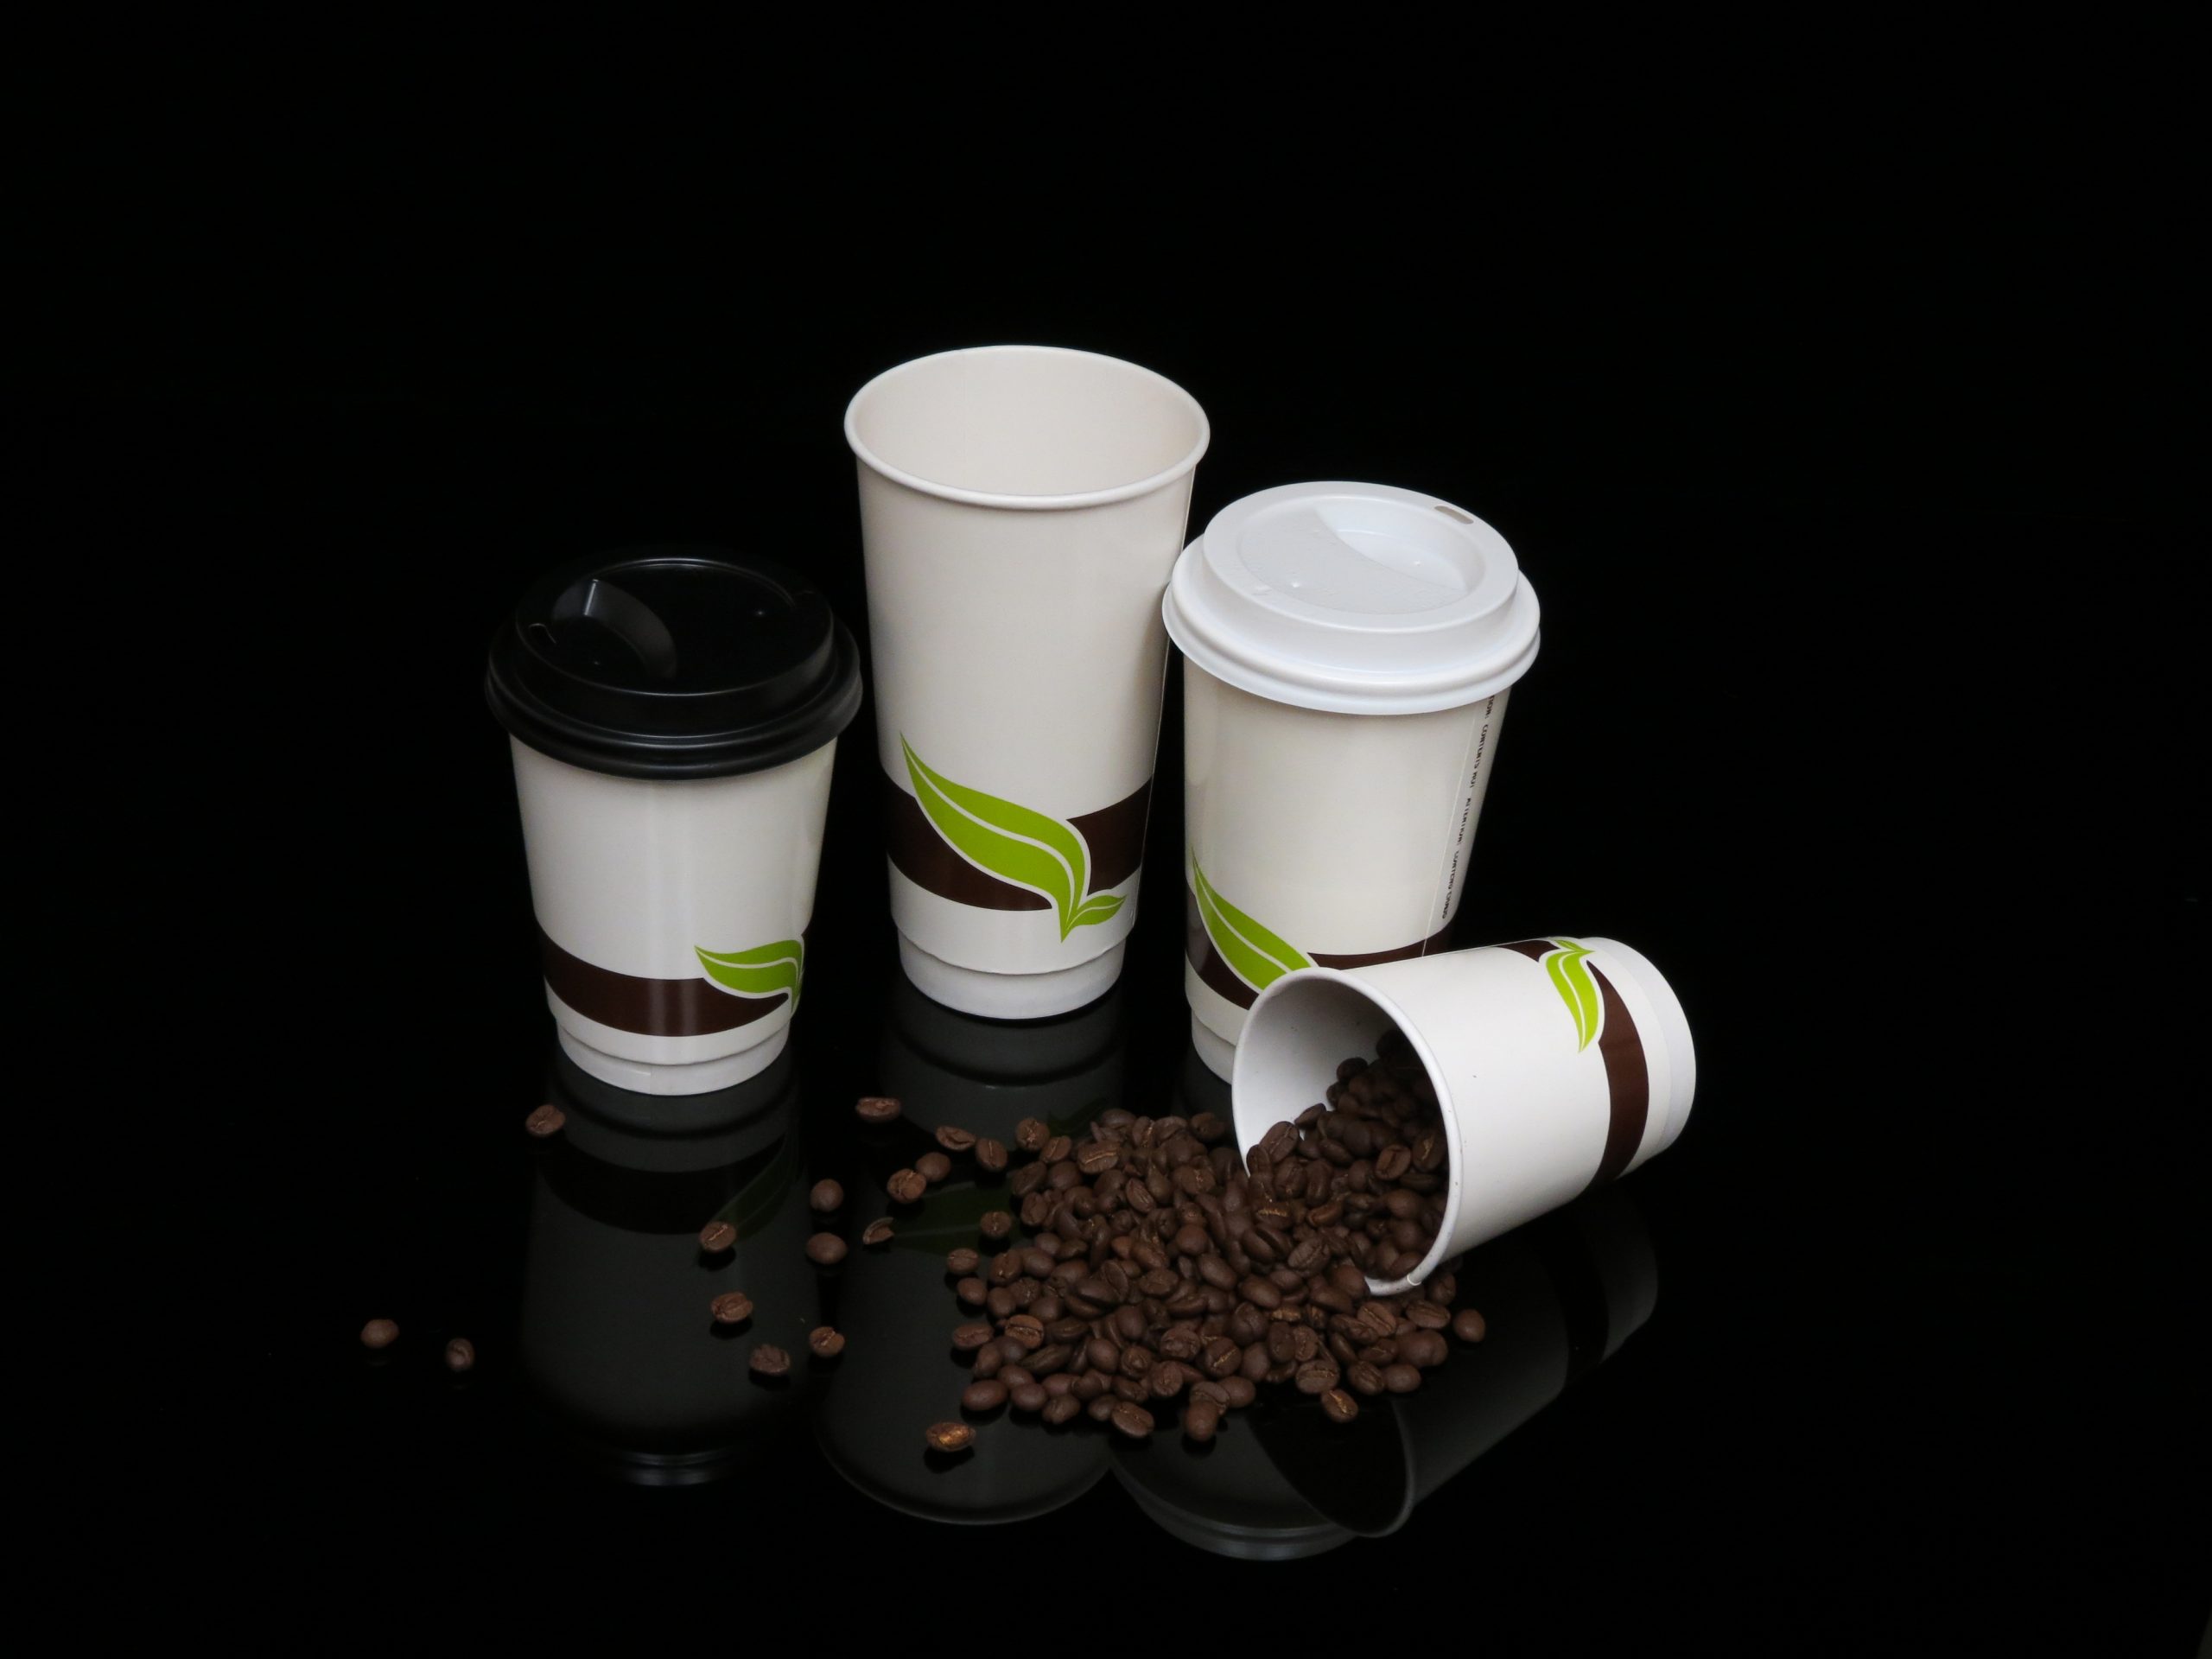 https://greencentury.ca/wp-content/uploads/2020/12/Group-Photo-of-Vista-Double-Wall-Paper-Cup-scaled.jpg